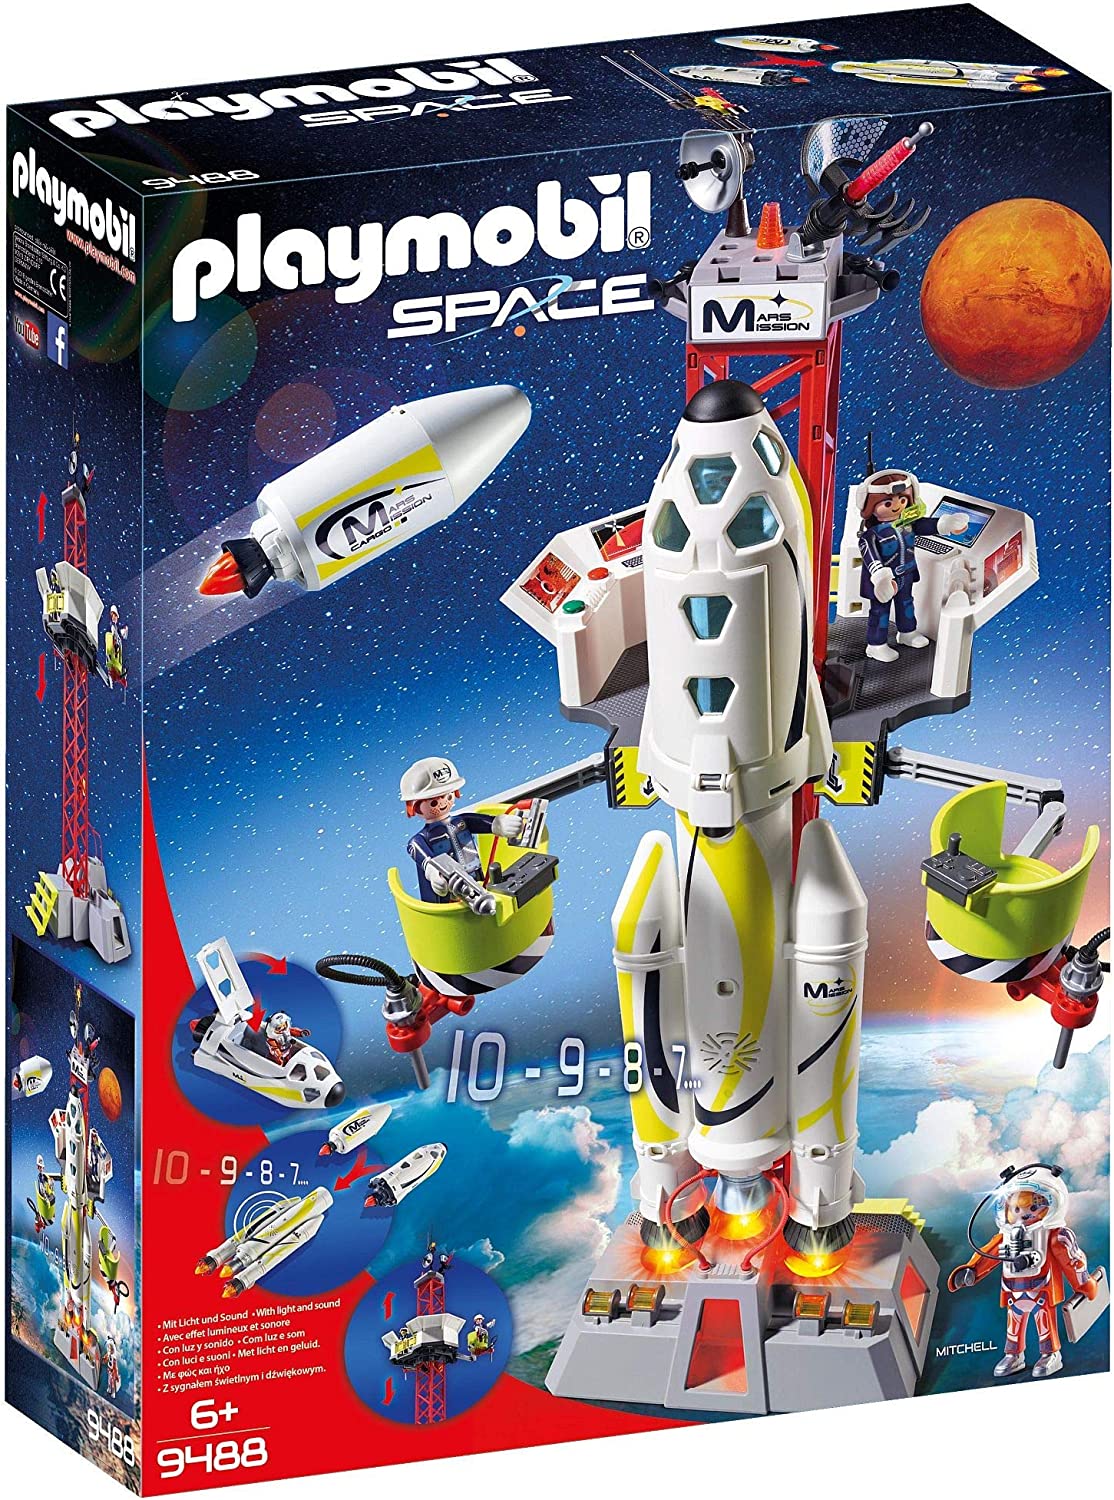 PLAYMOBIL Mission Rocket with Launch Site, 27.94 x 71.88 x 22.1 cm